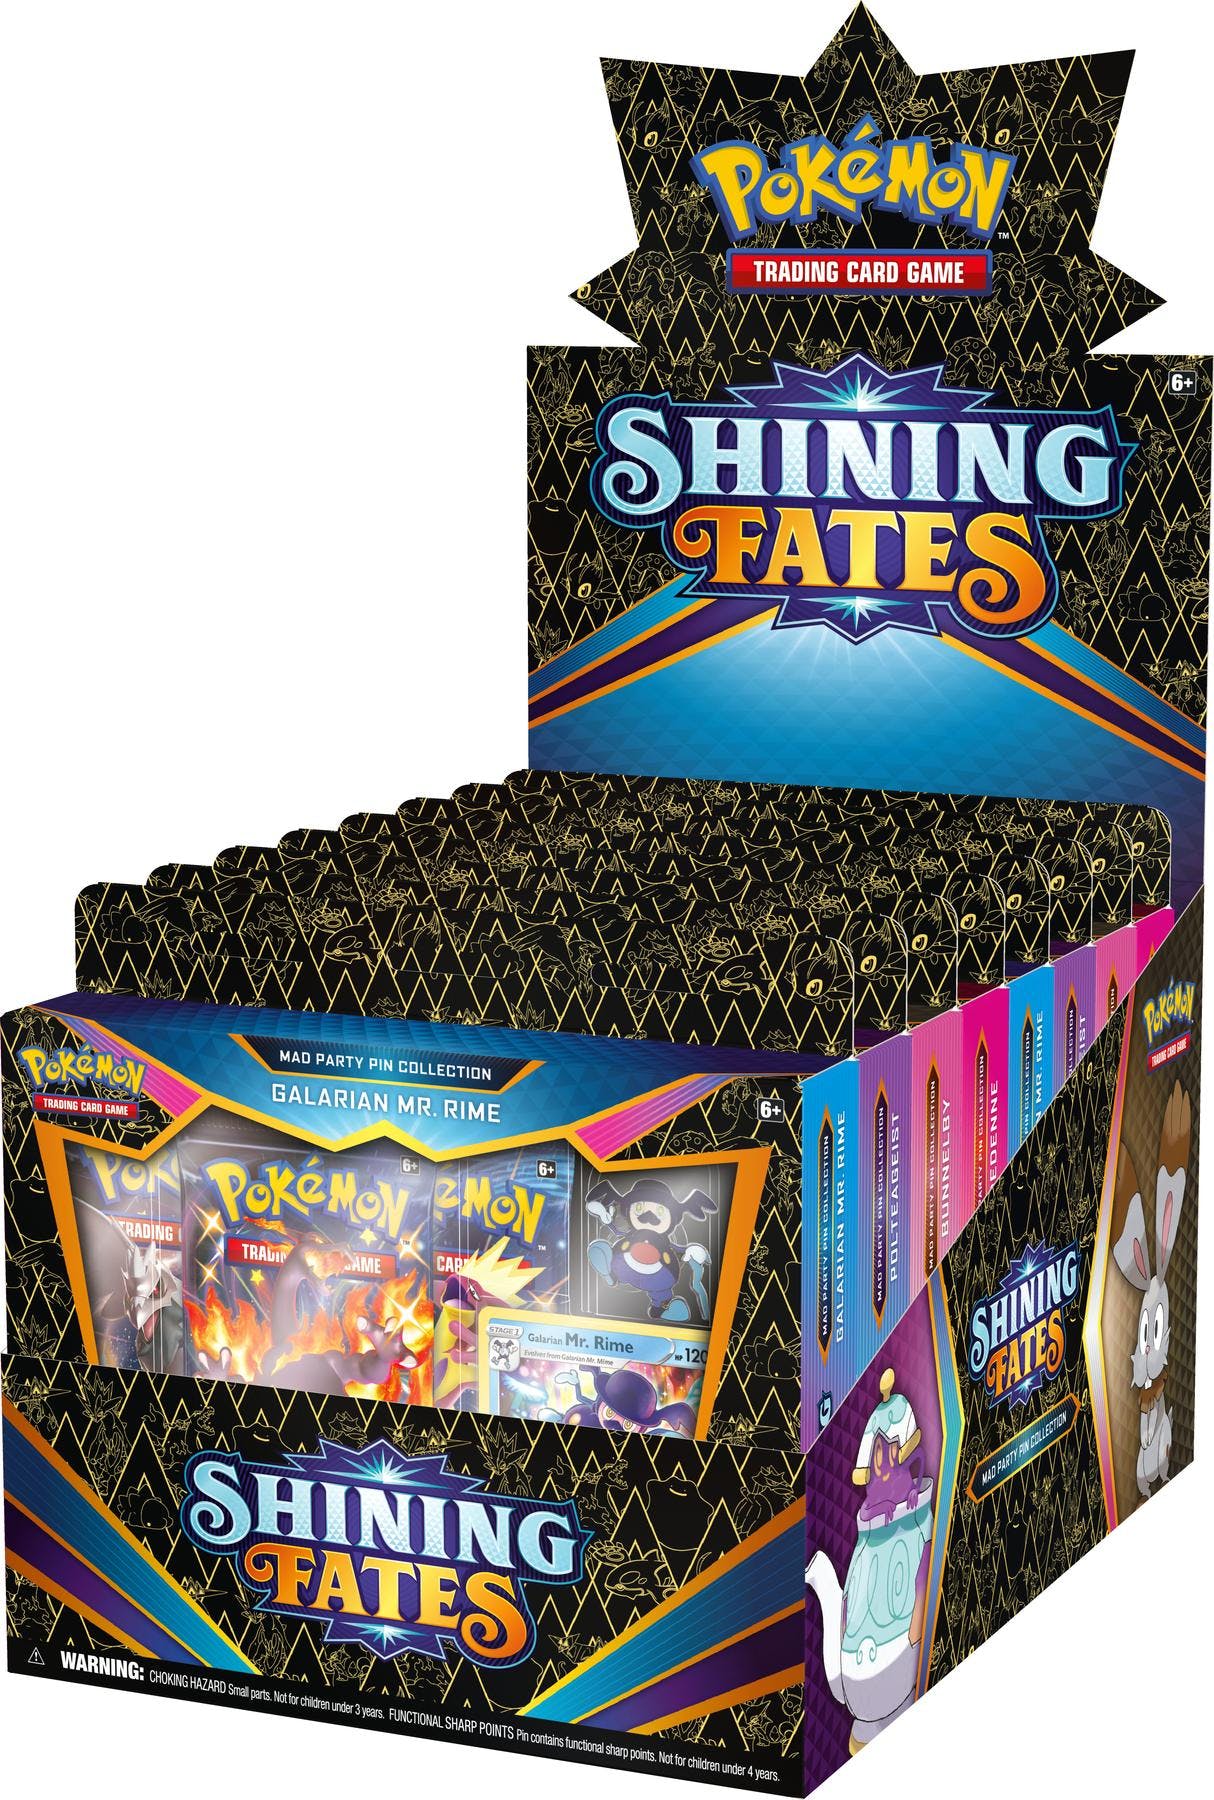 Shining Fates - Mad Party Pin Collection Case | Devastation Store